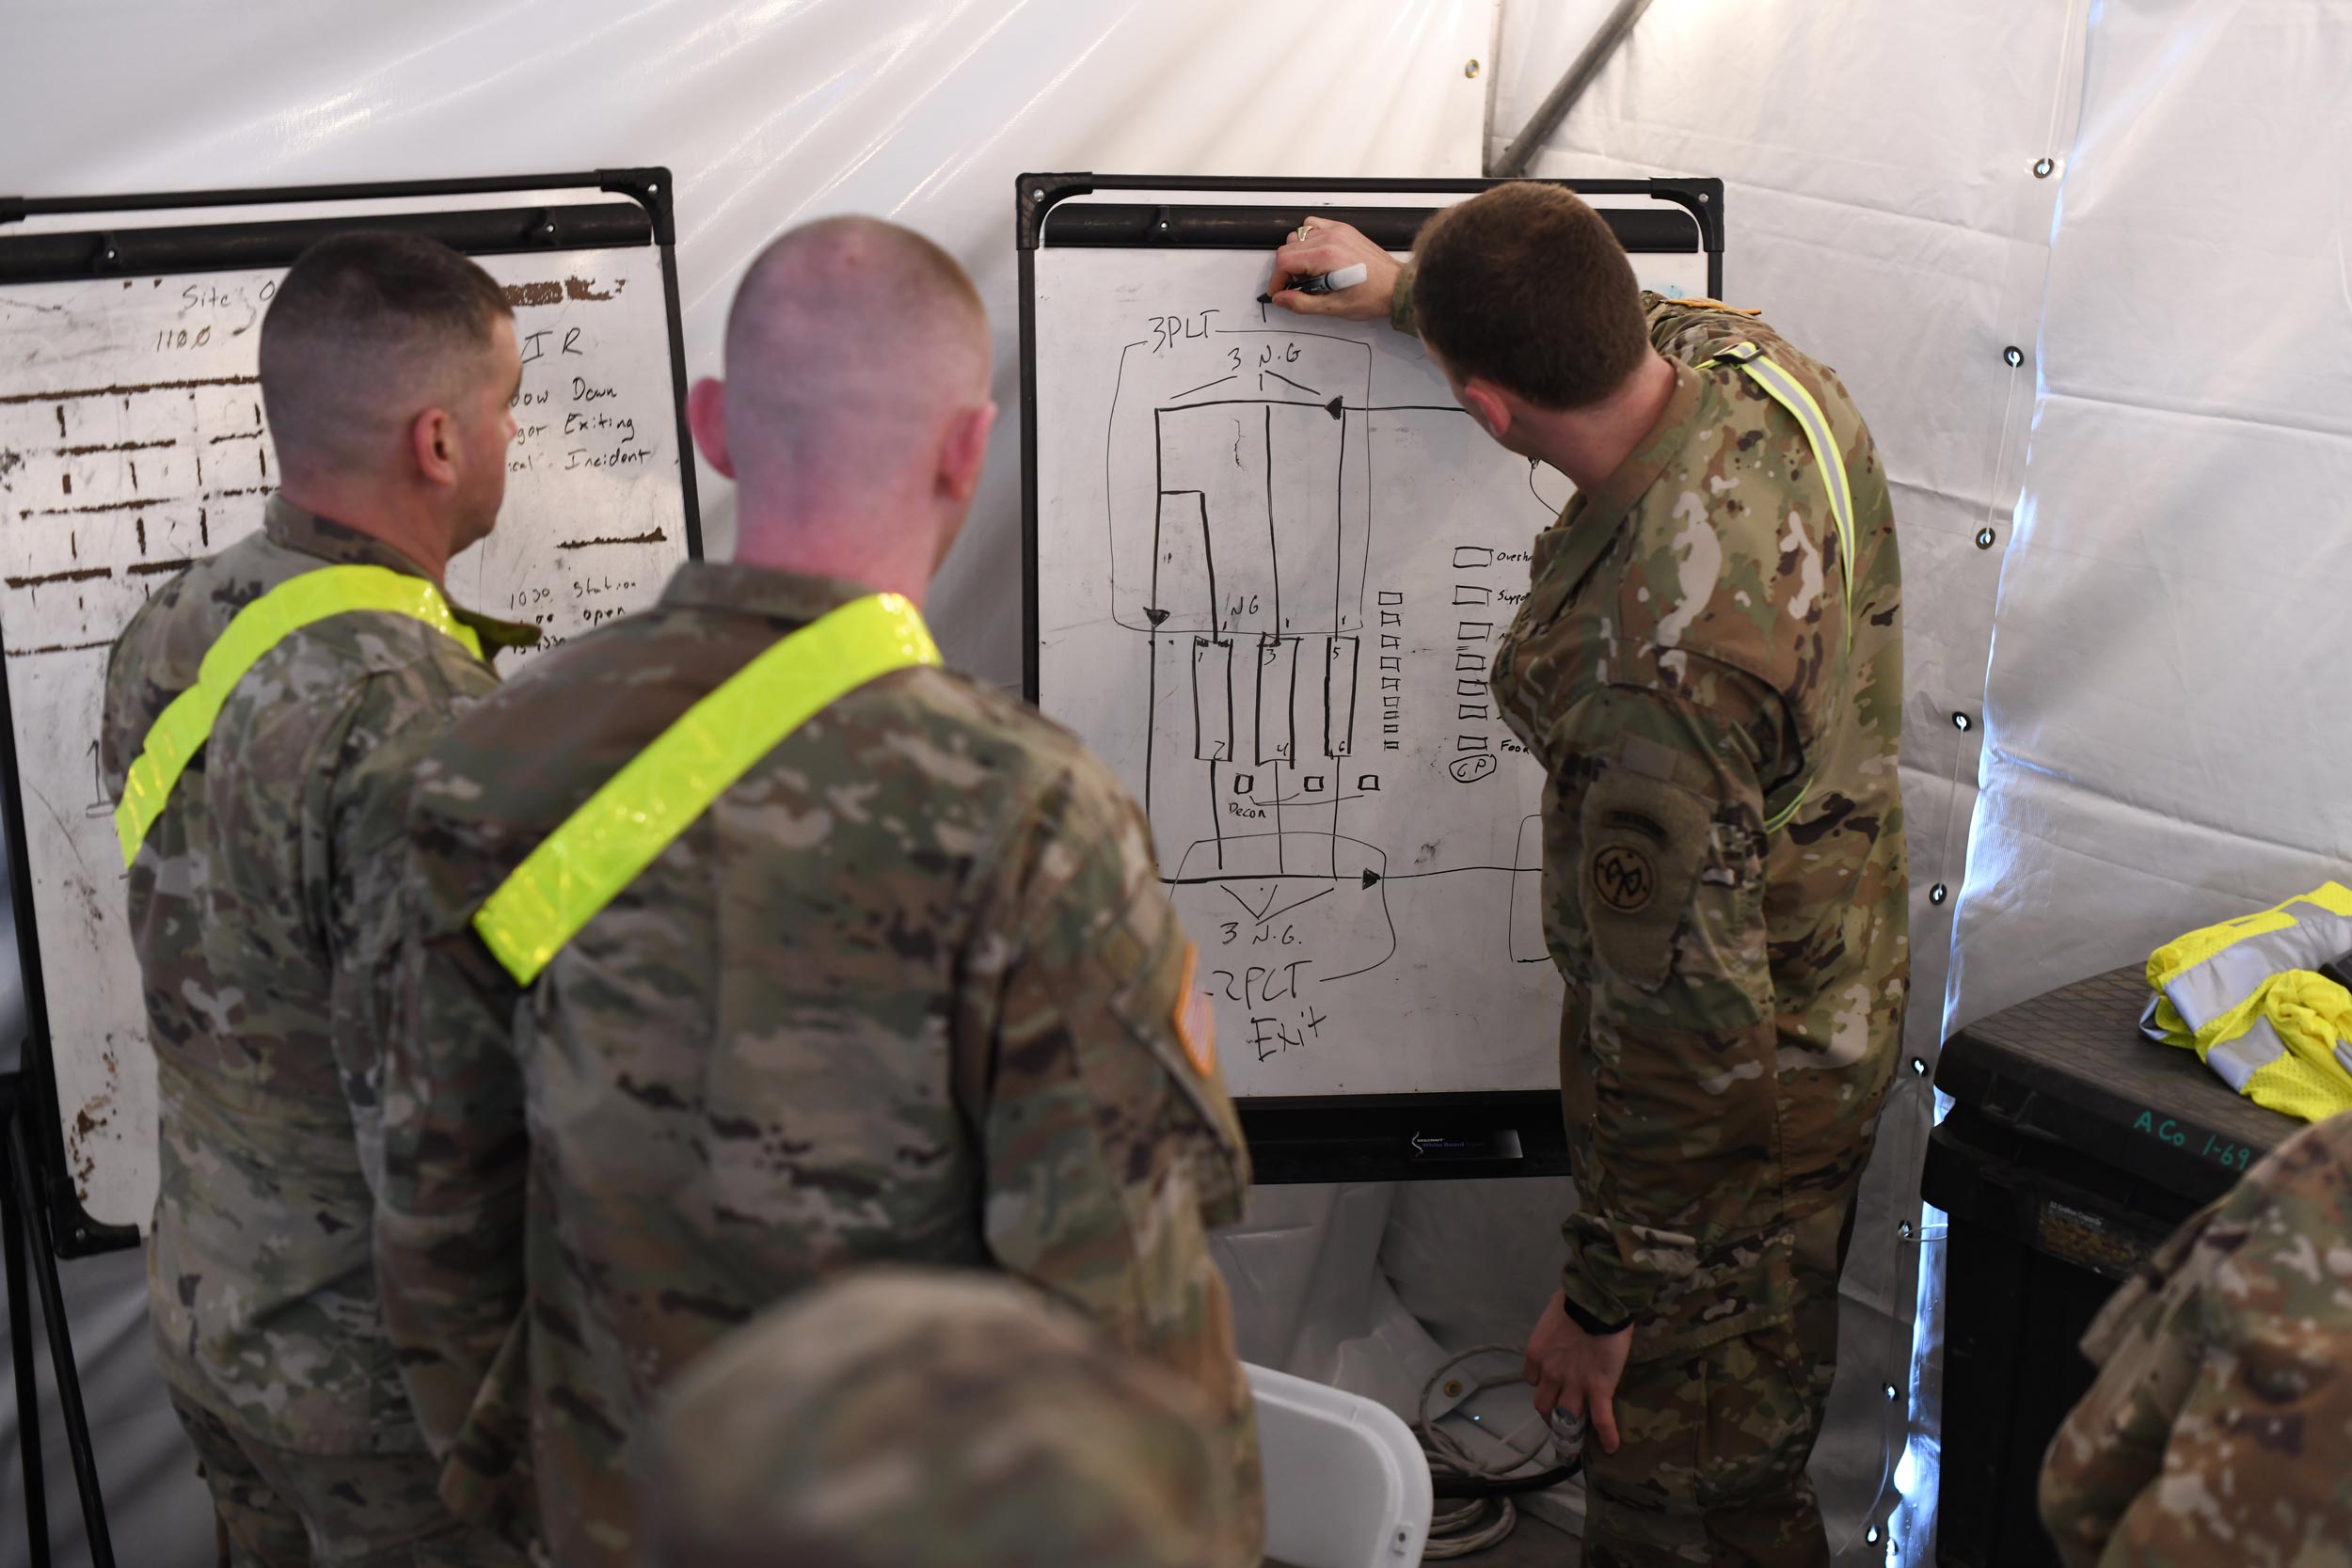 US Service members looking at another member drawing on a white board